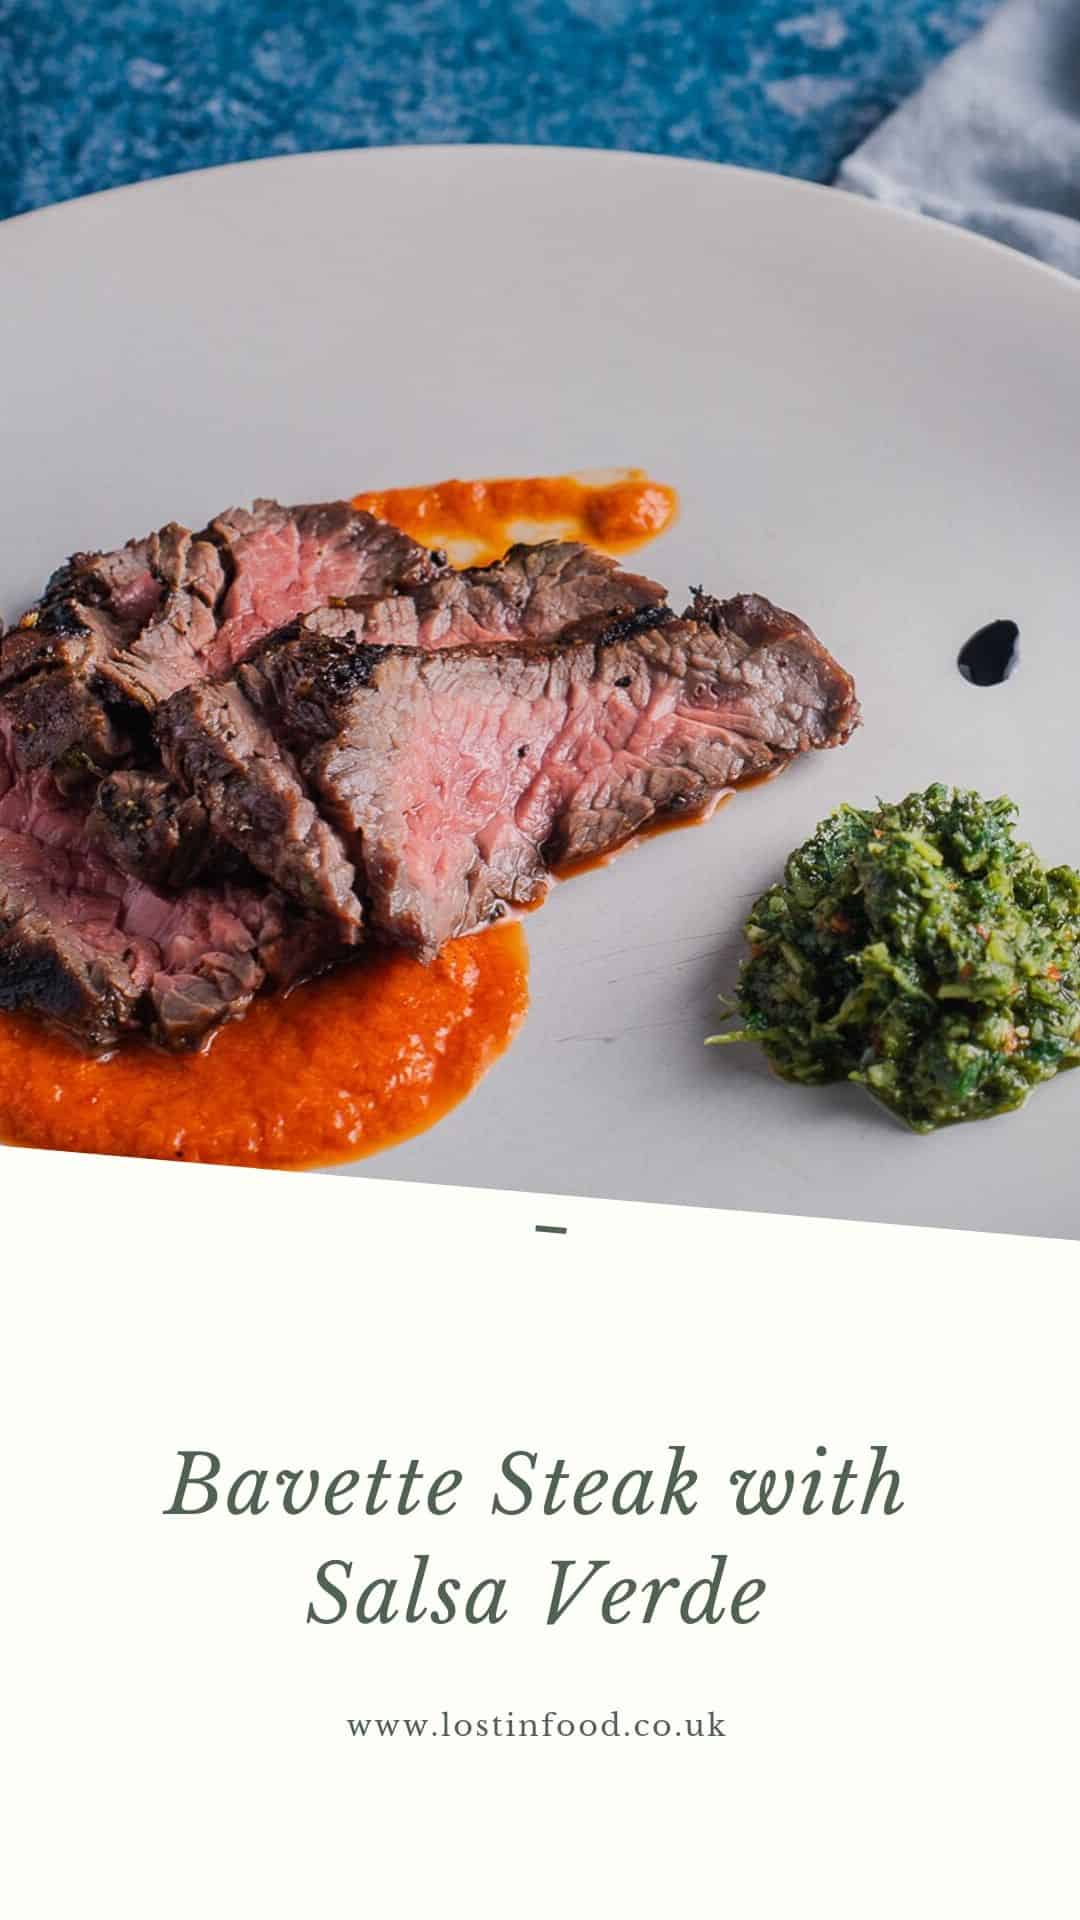 Slices of marinated bavette steak cooked medium rare on a bed of red pepper puree and a side of salsa verde and writing underneath with Bavette Steak with Salsa Verde.